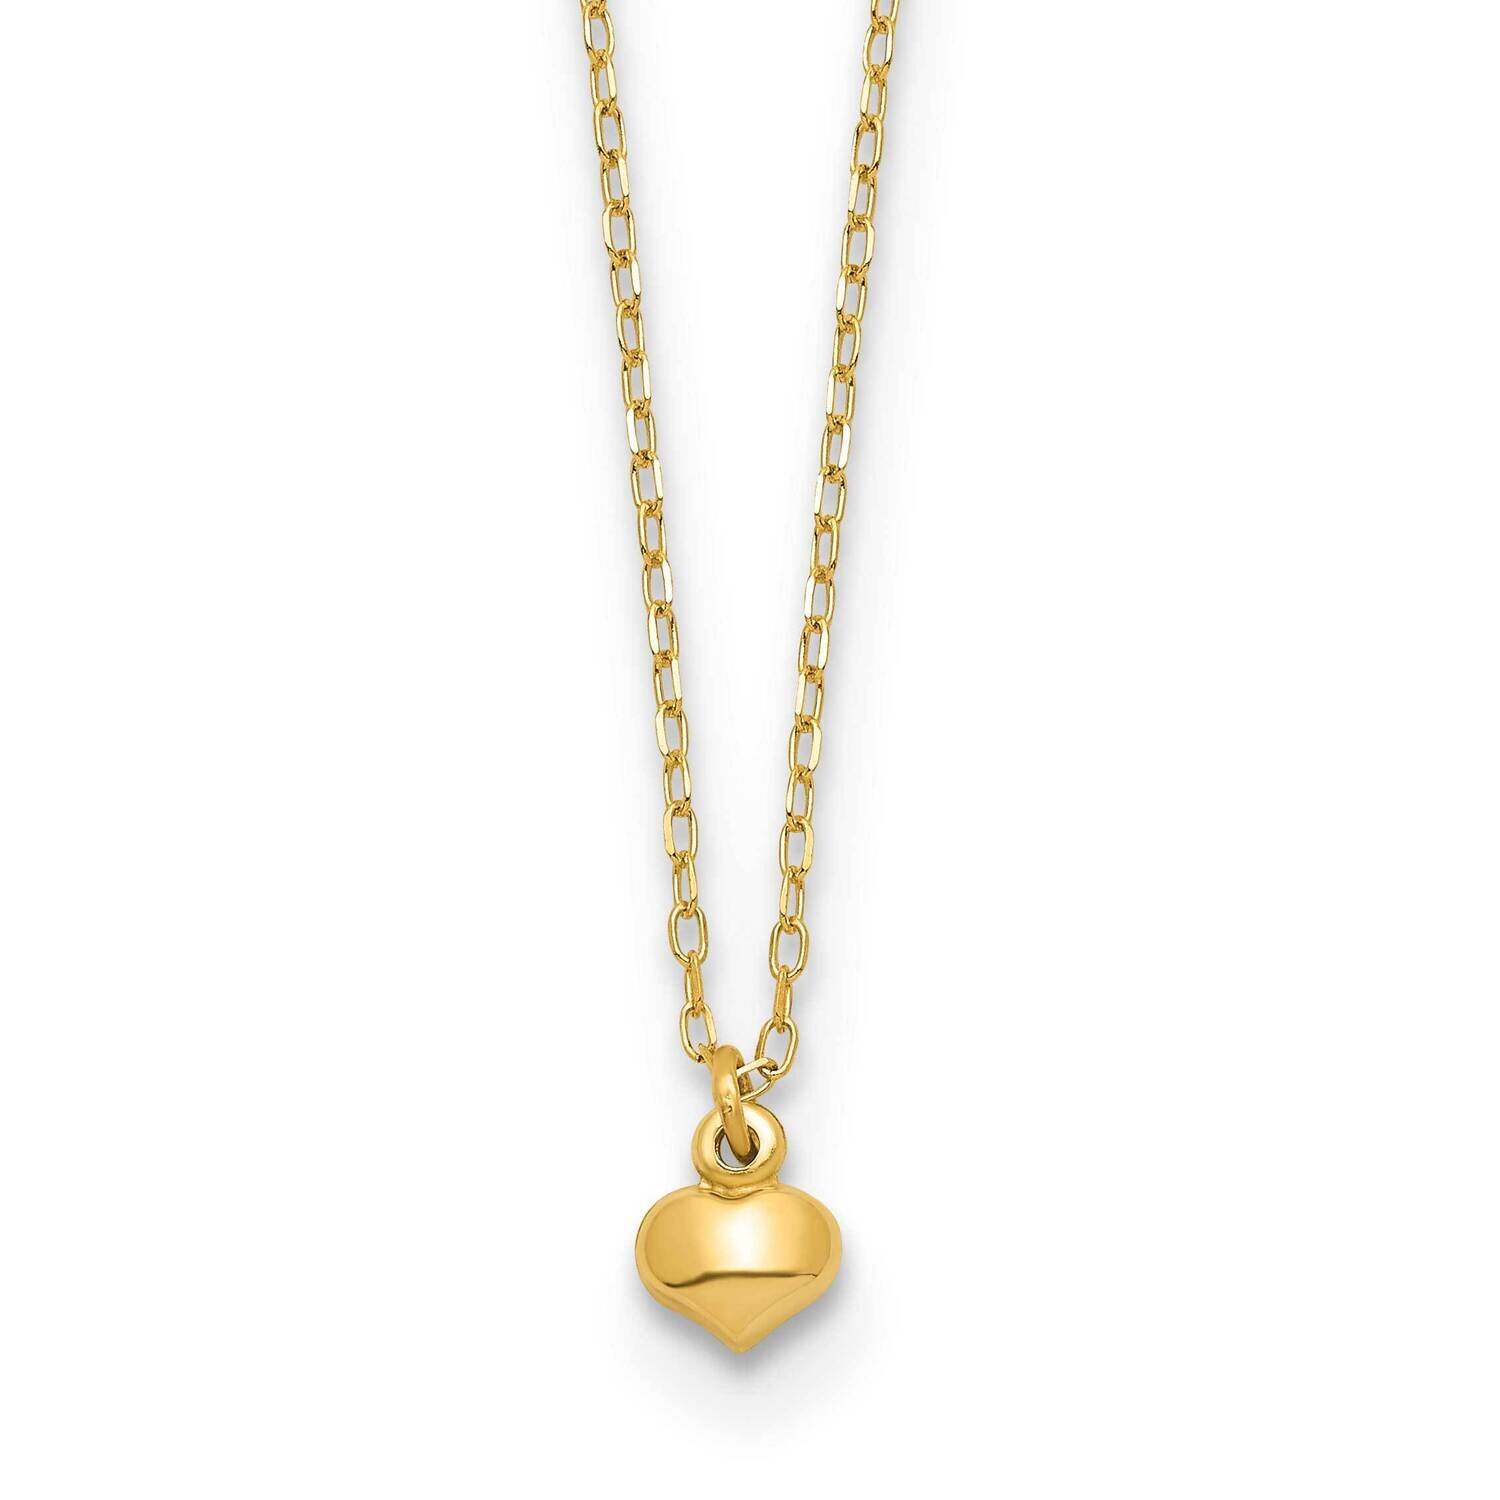 Puffed Heart 16.5 Inch Necklace 14k Gold Polished SF2869-16.5